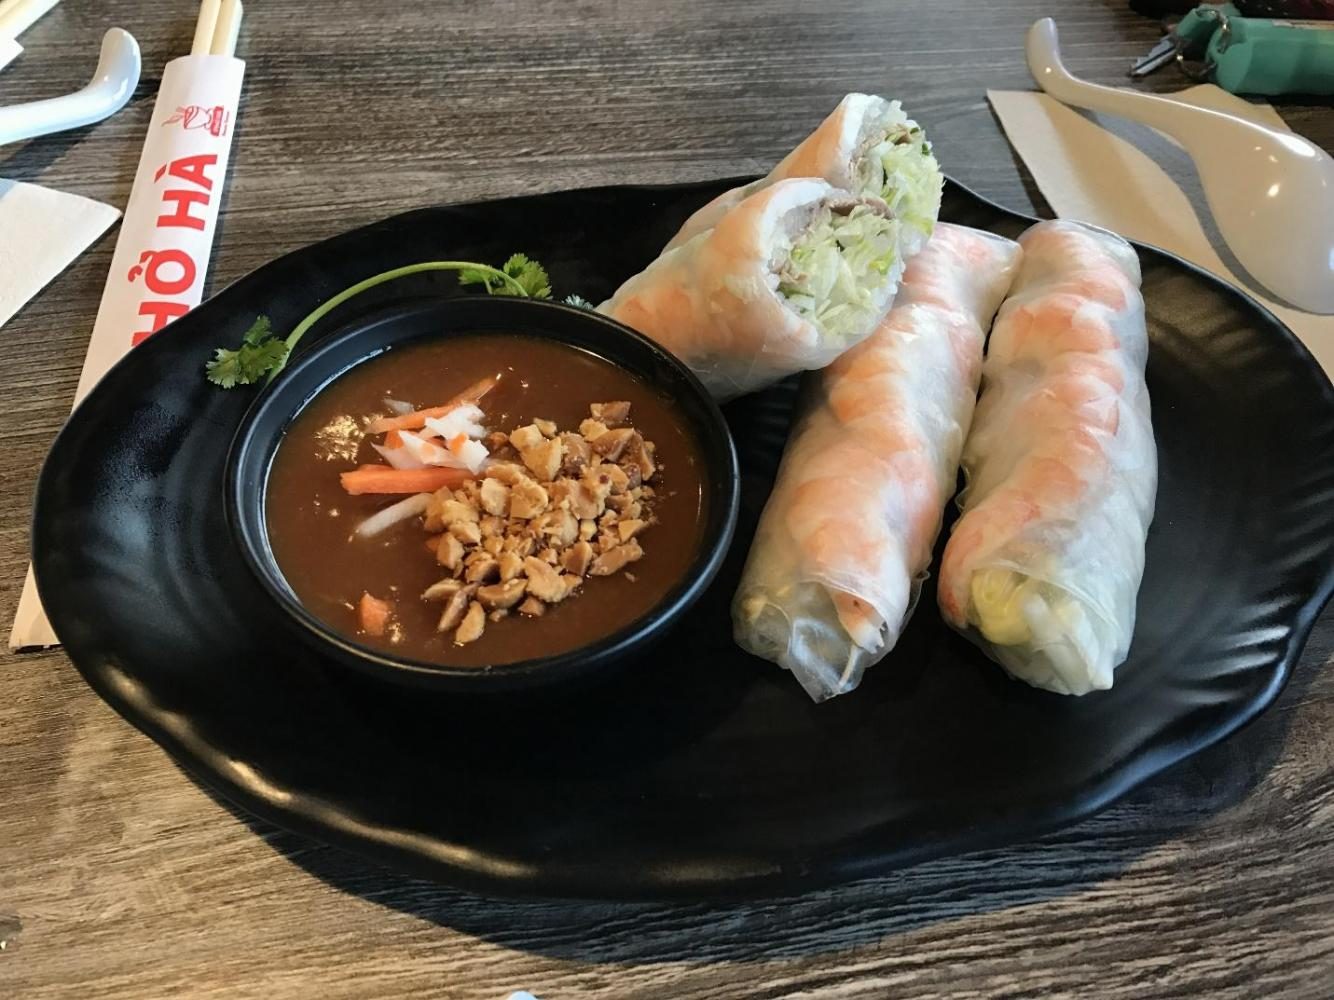 AMELIE LEE
Pho noodles and shrimp spring rolls with peanut sauce are served at the newly opened Pho Ha, located at the old Bob’s Big Boy location. The restaurant also offers various other types of Vietnamese food and drinks.